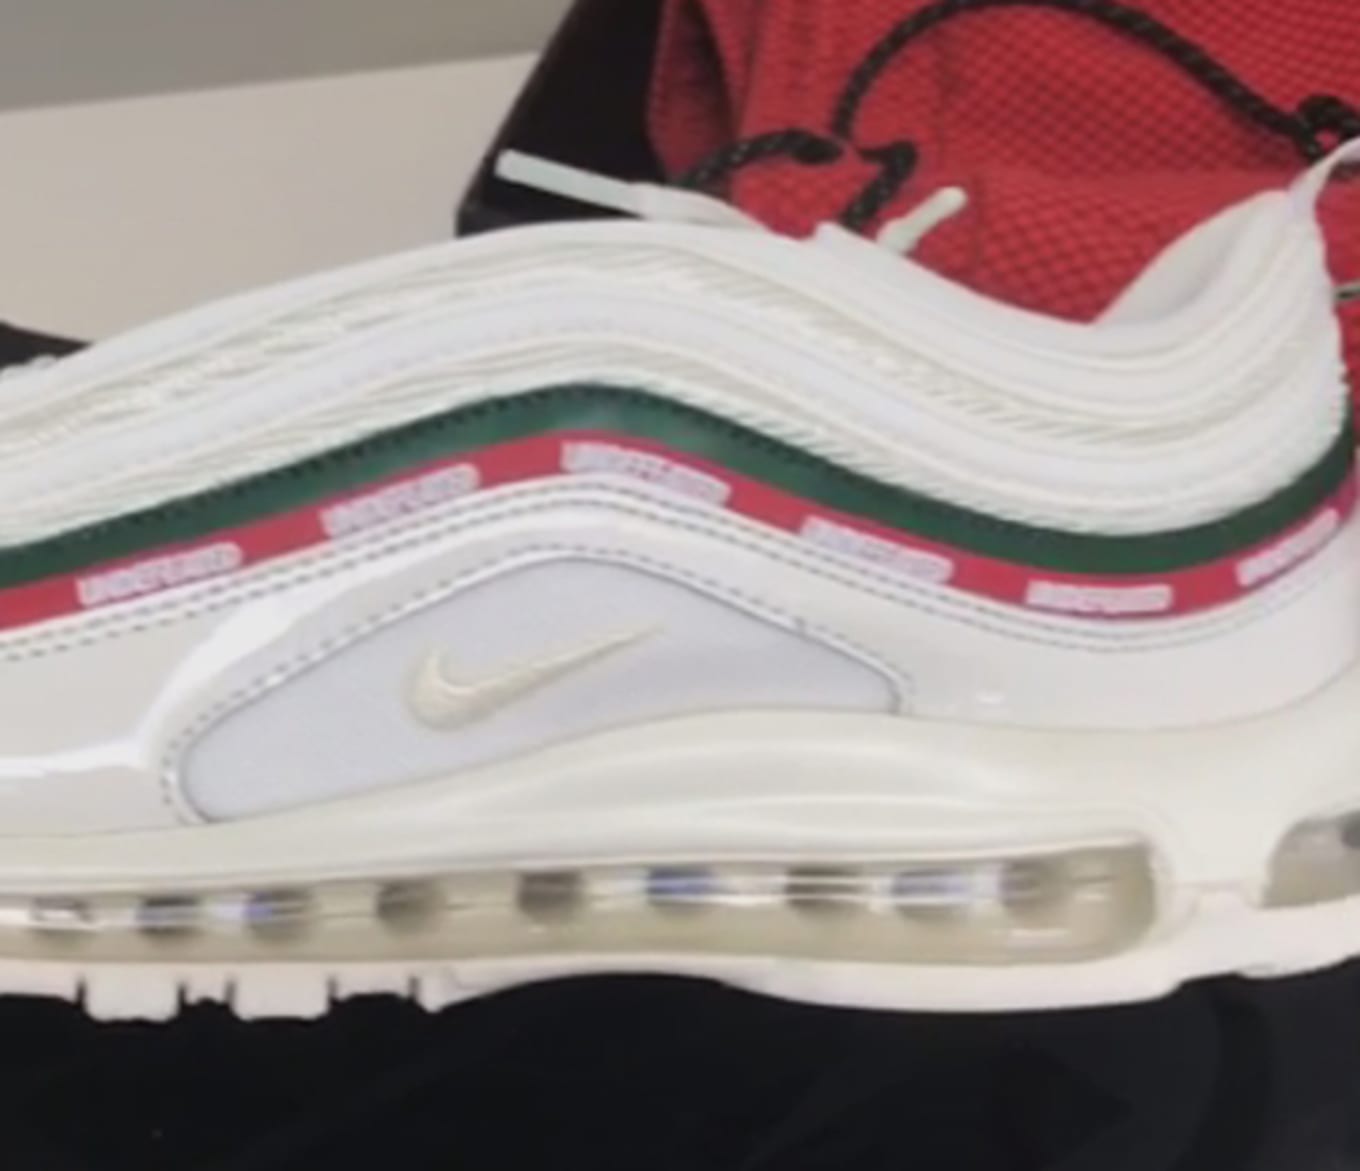 Undefeated Nike Air Max 97 Sail White Green Red AJ1986-100 Collector